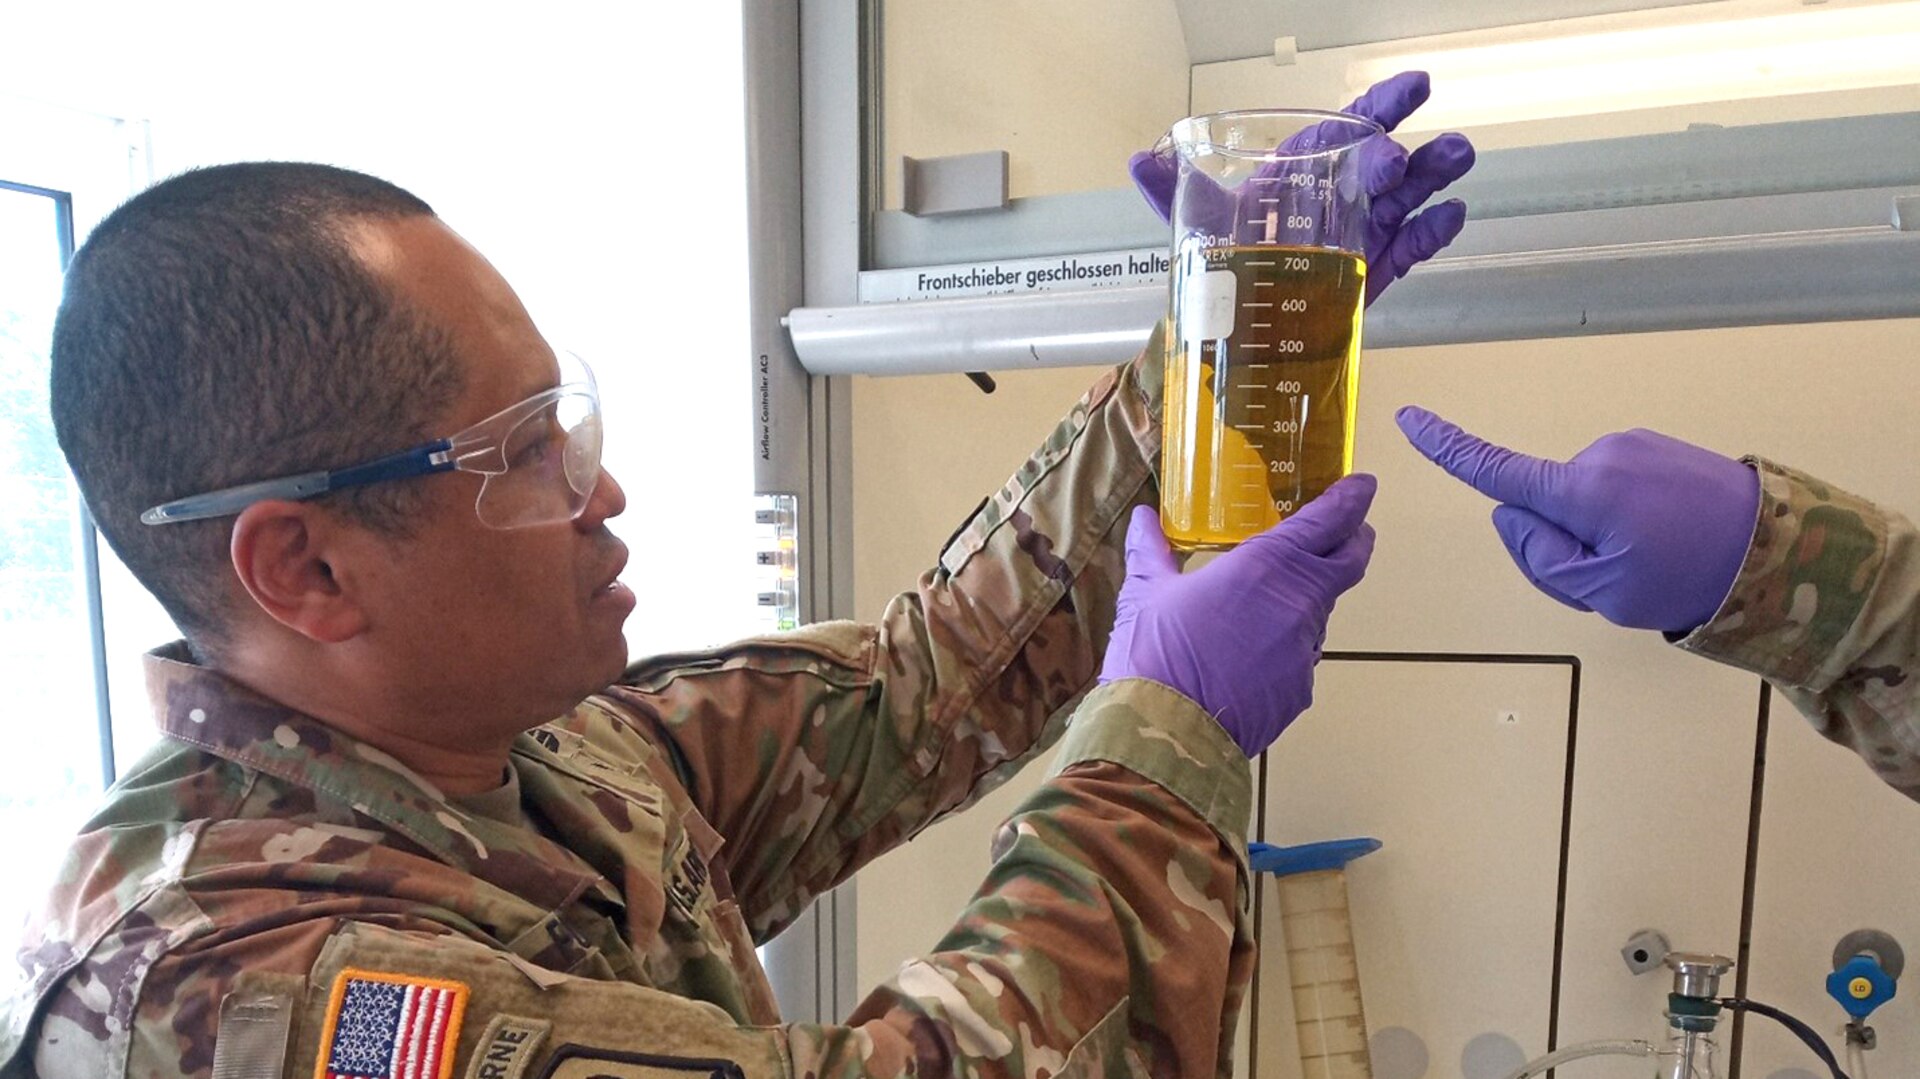 A military officer in uniform looks at a sample of fuel